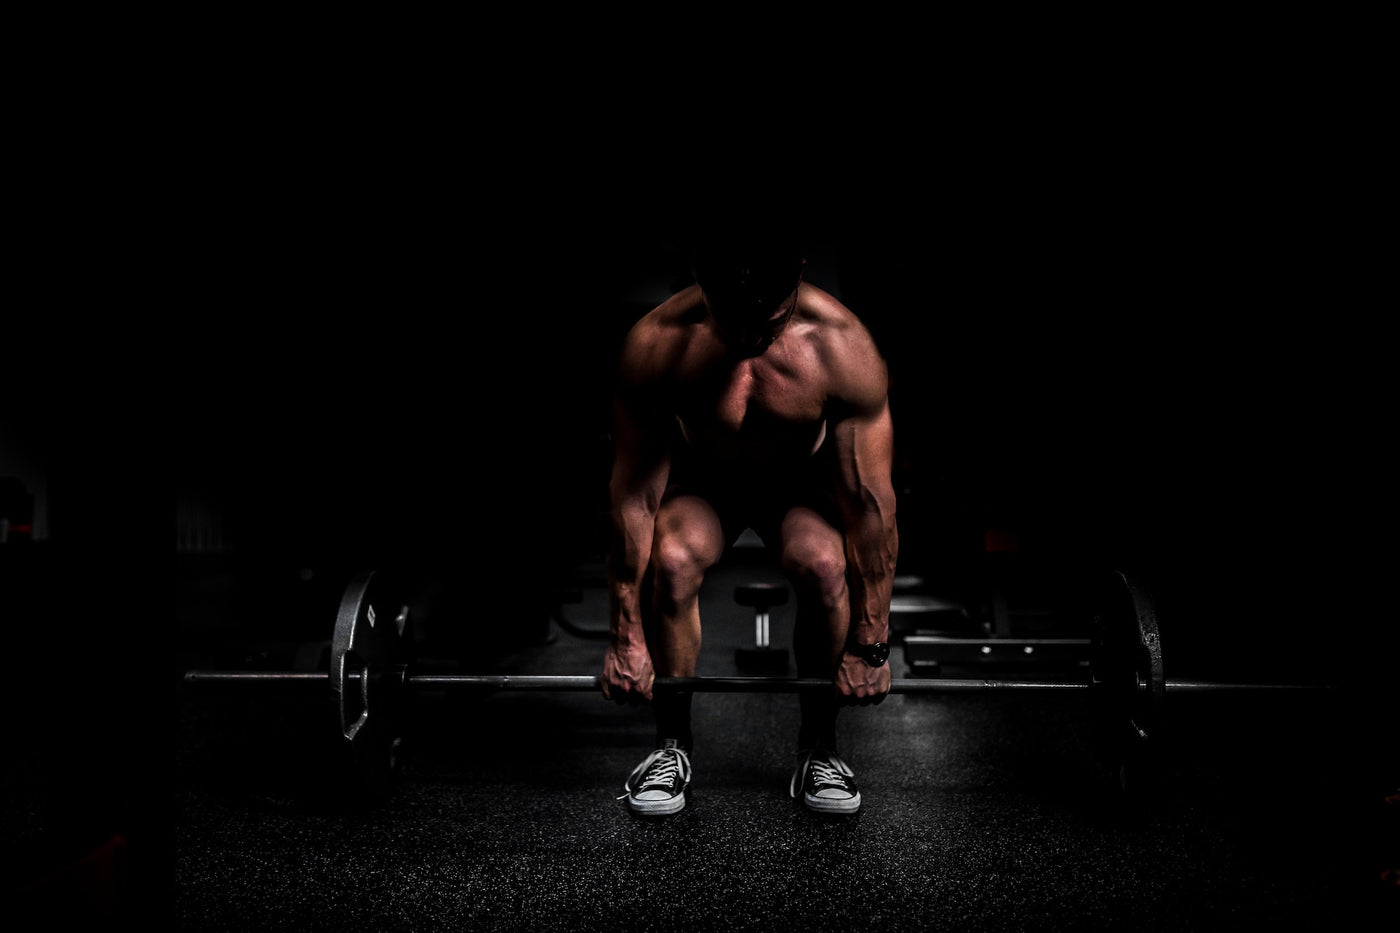 Bodybuilding and Performance Enhancement Supplements: The Good, the Bad, and the Ugly